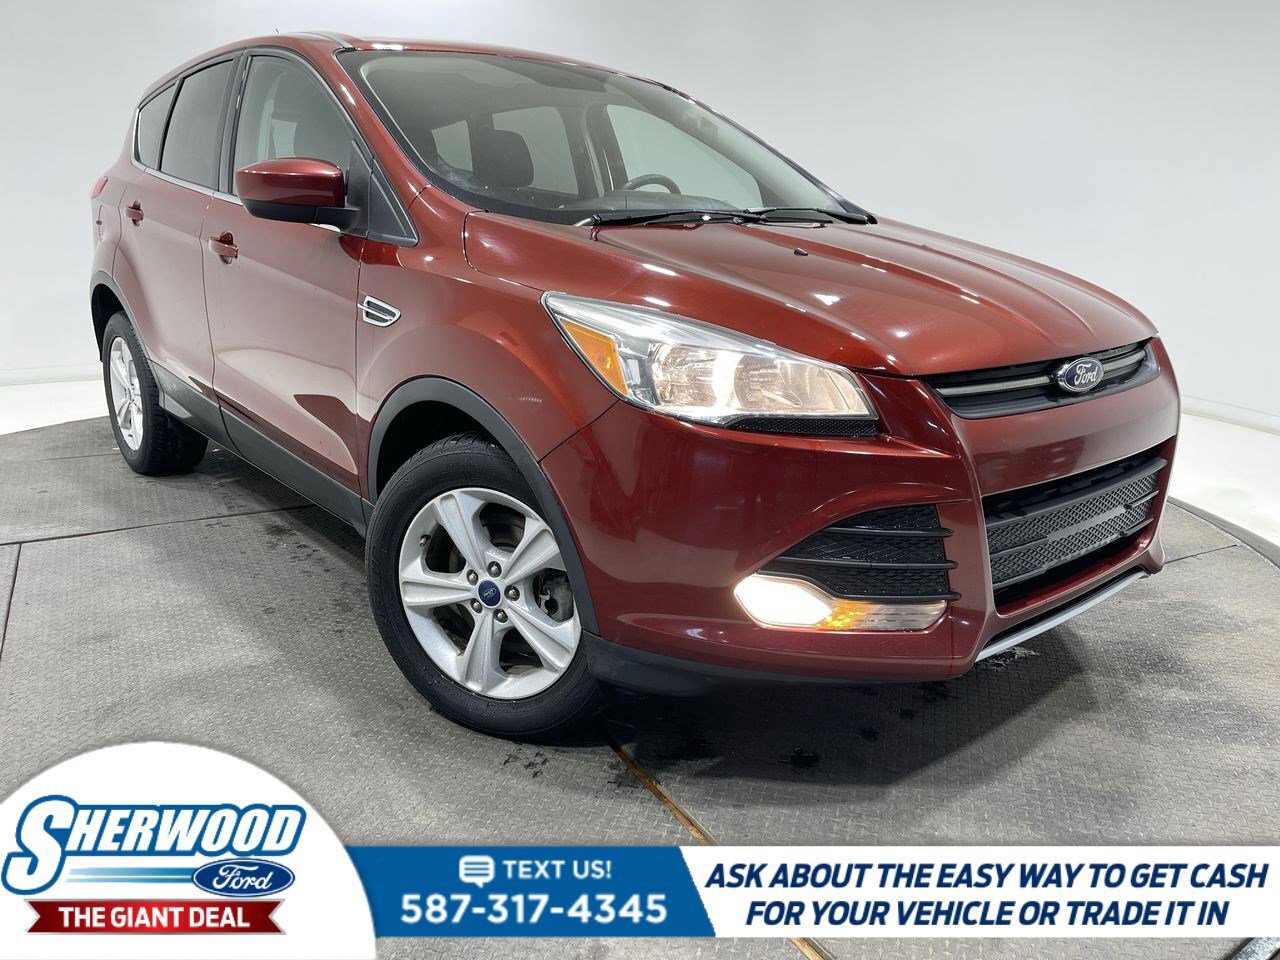 2014 Ford Escape SE AWD-$0 Down $142 Weekly CLEAN CARFAX LOW KM